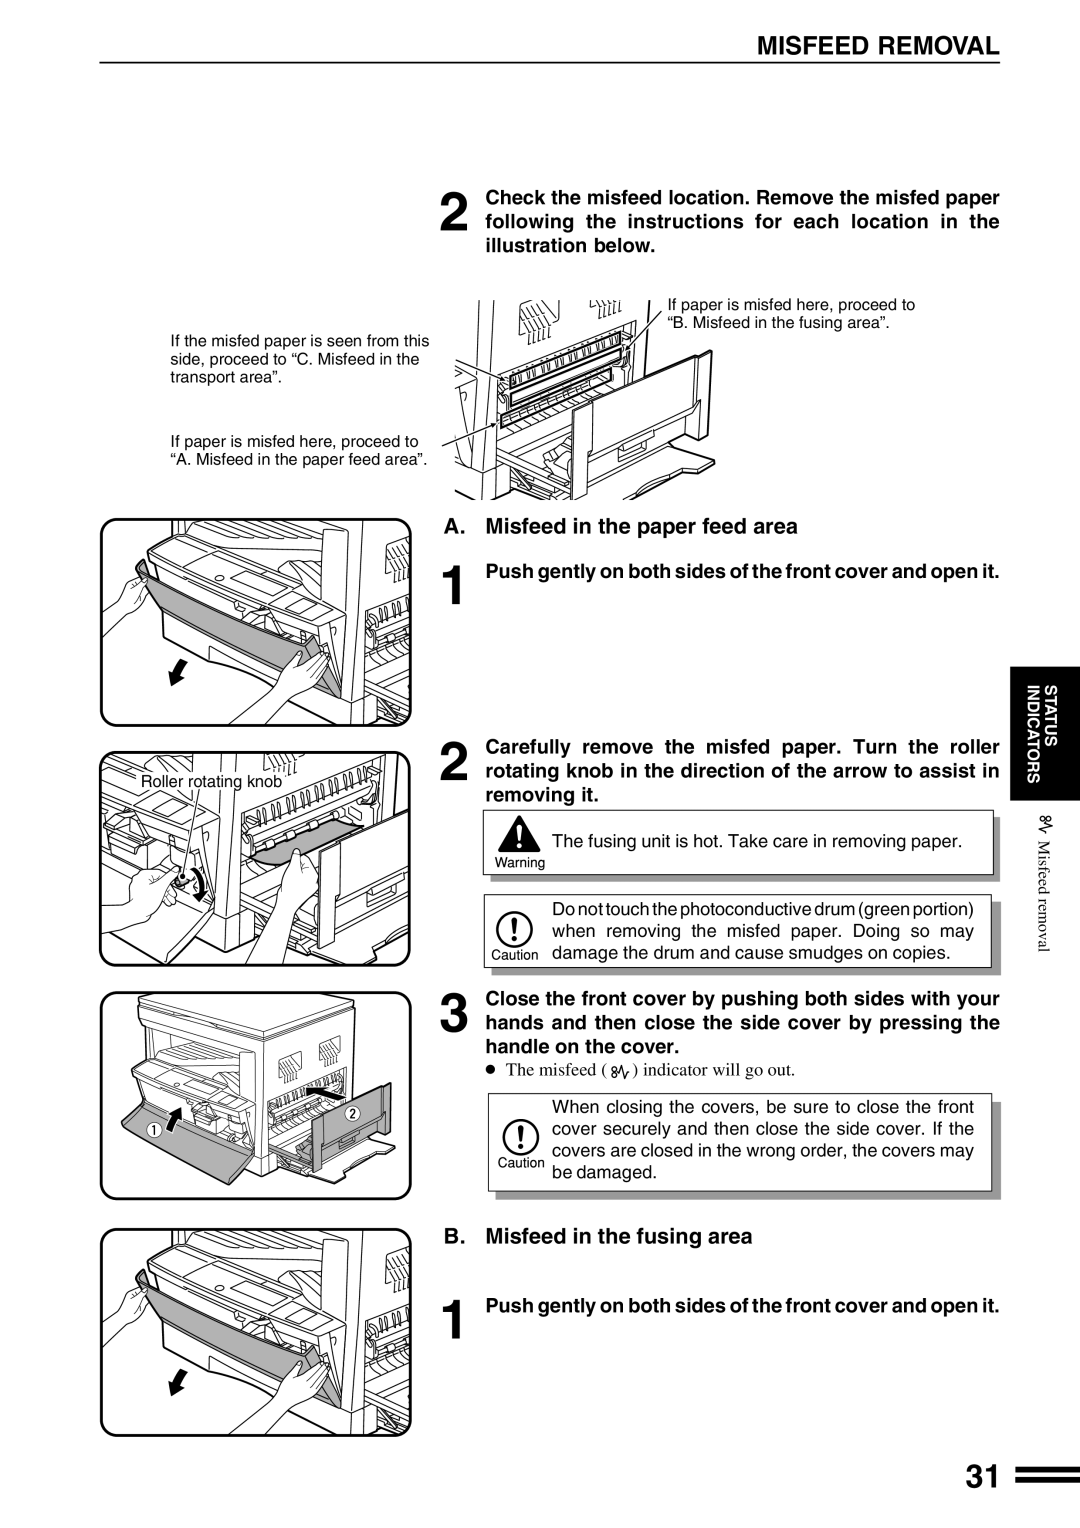 Sharp AR-162S operation manual Misfeed Removal, Misfeed in the paper feed area, B. Misfeed in the fusing area, removing it 